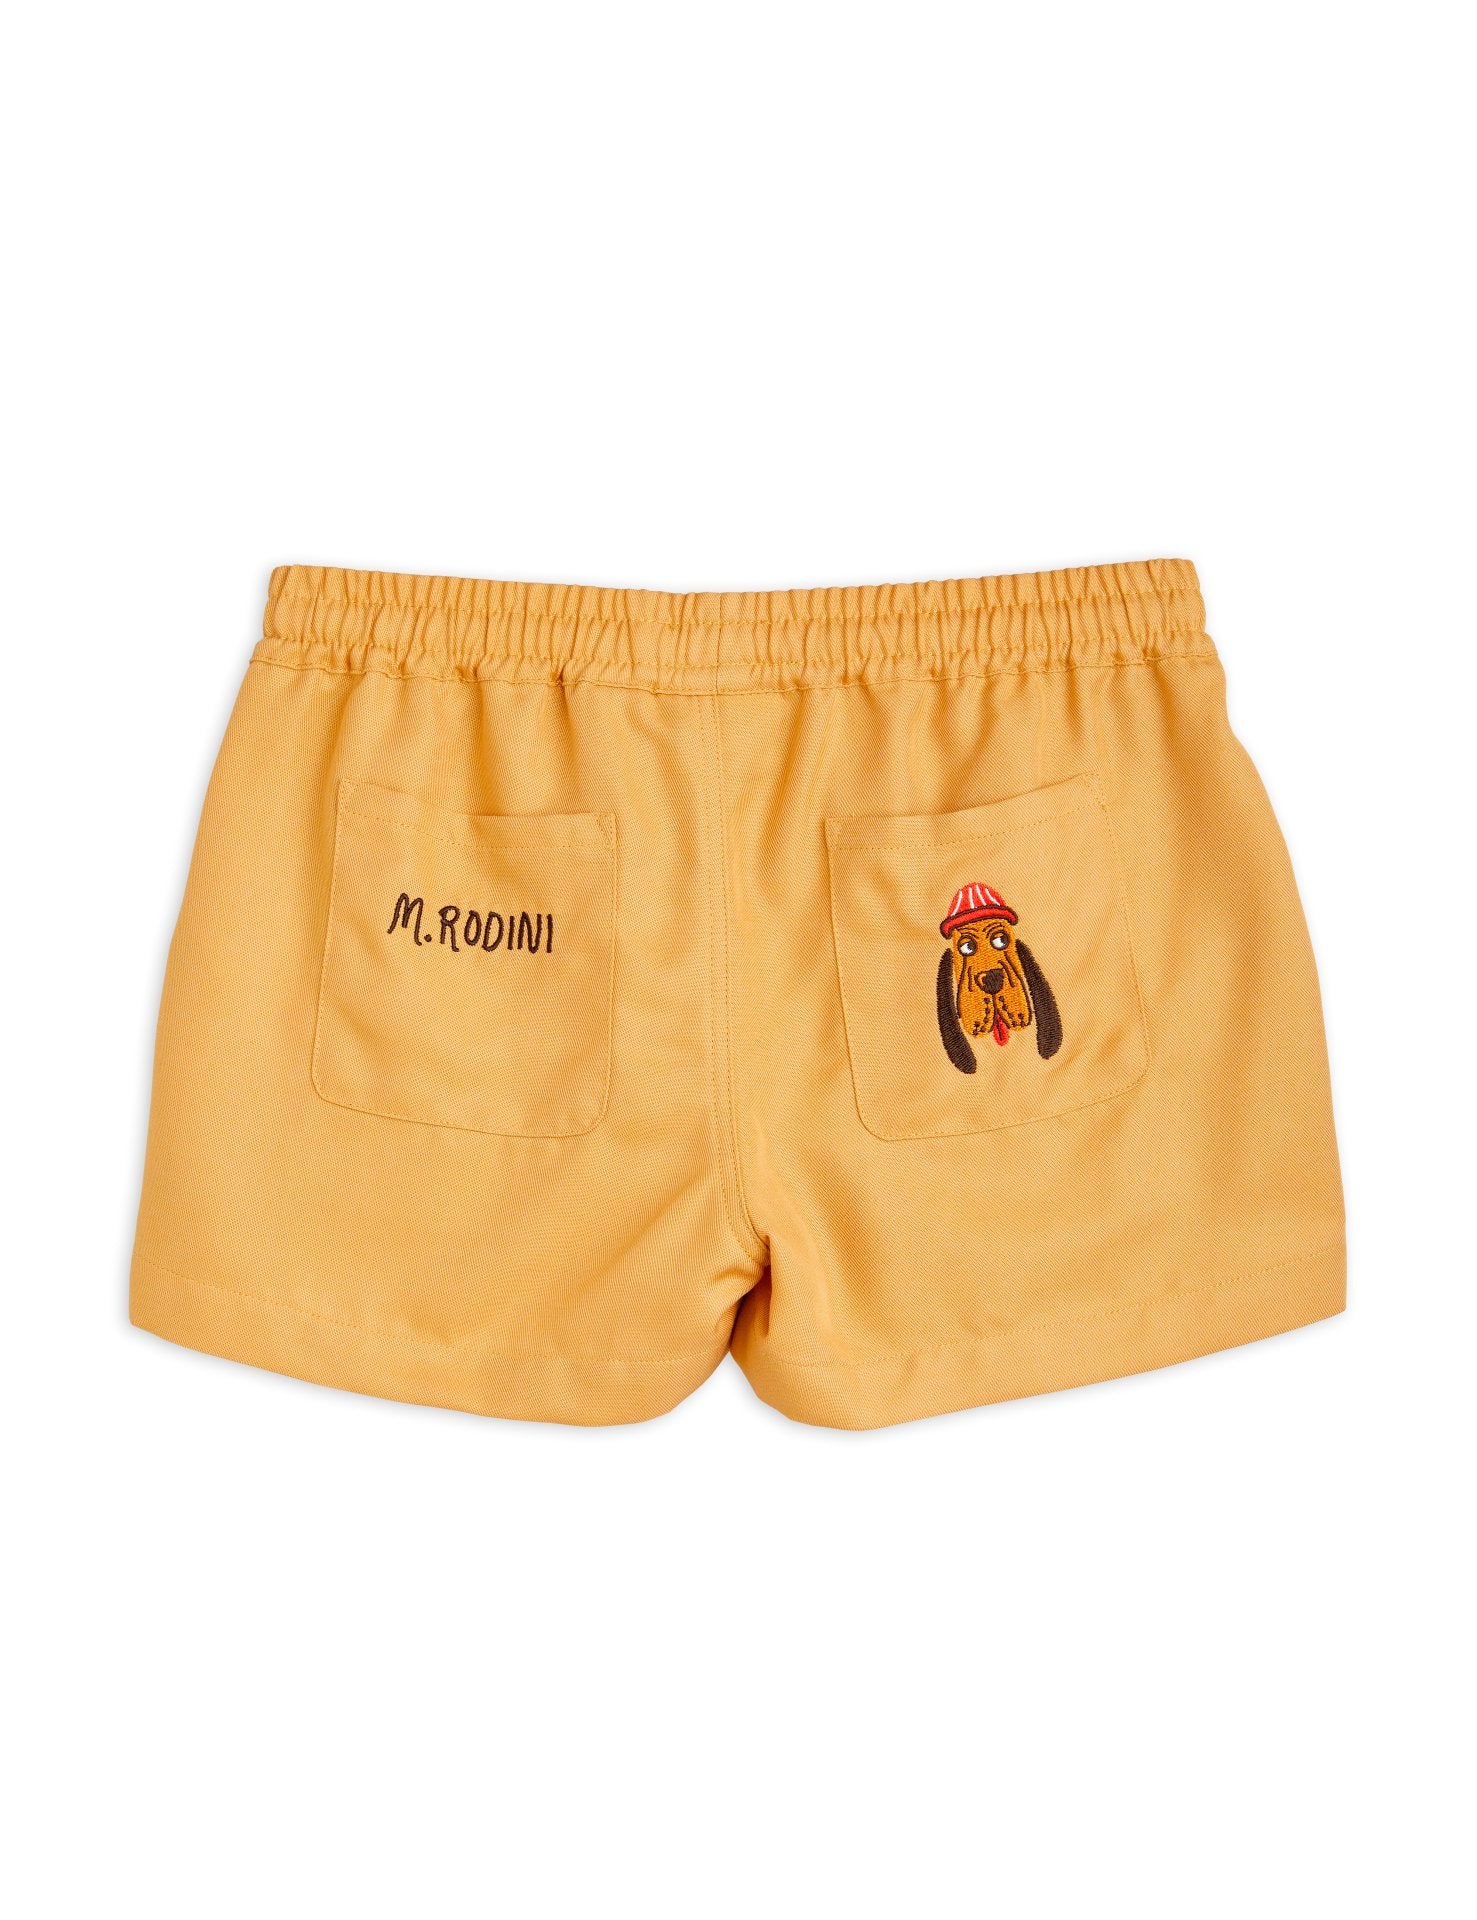 Bloodhound emb woven shorts